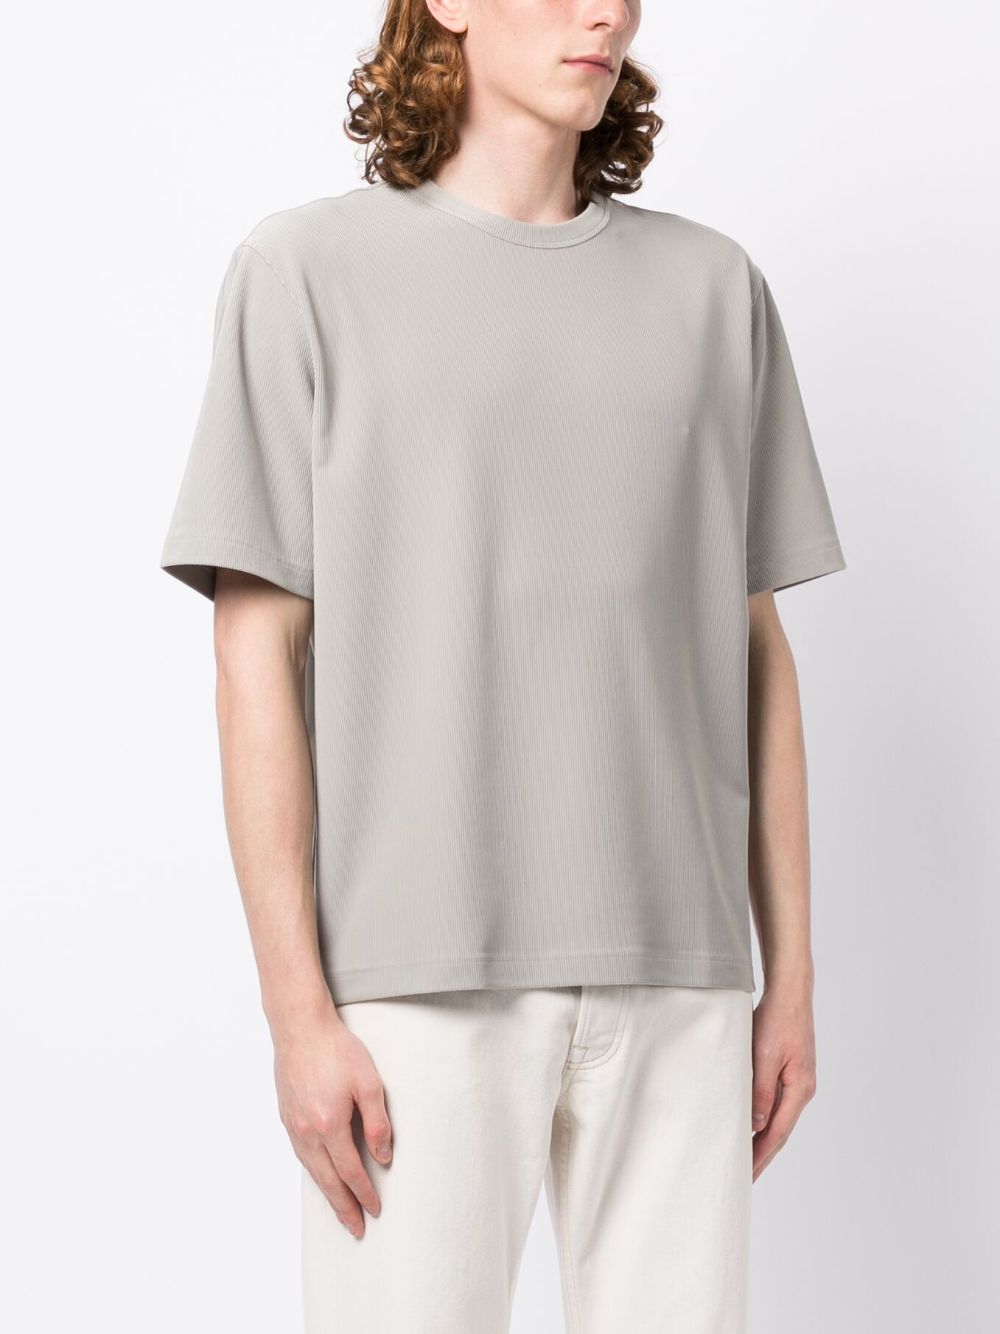 Shop Man On The Boon. Ribbed Crew-neck T-shirt In Brown